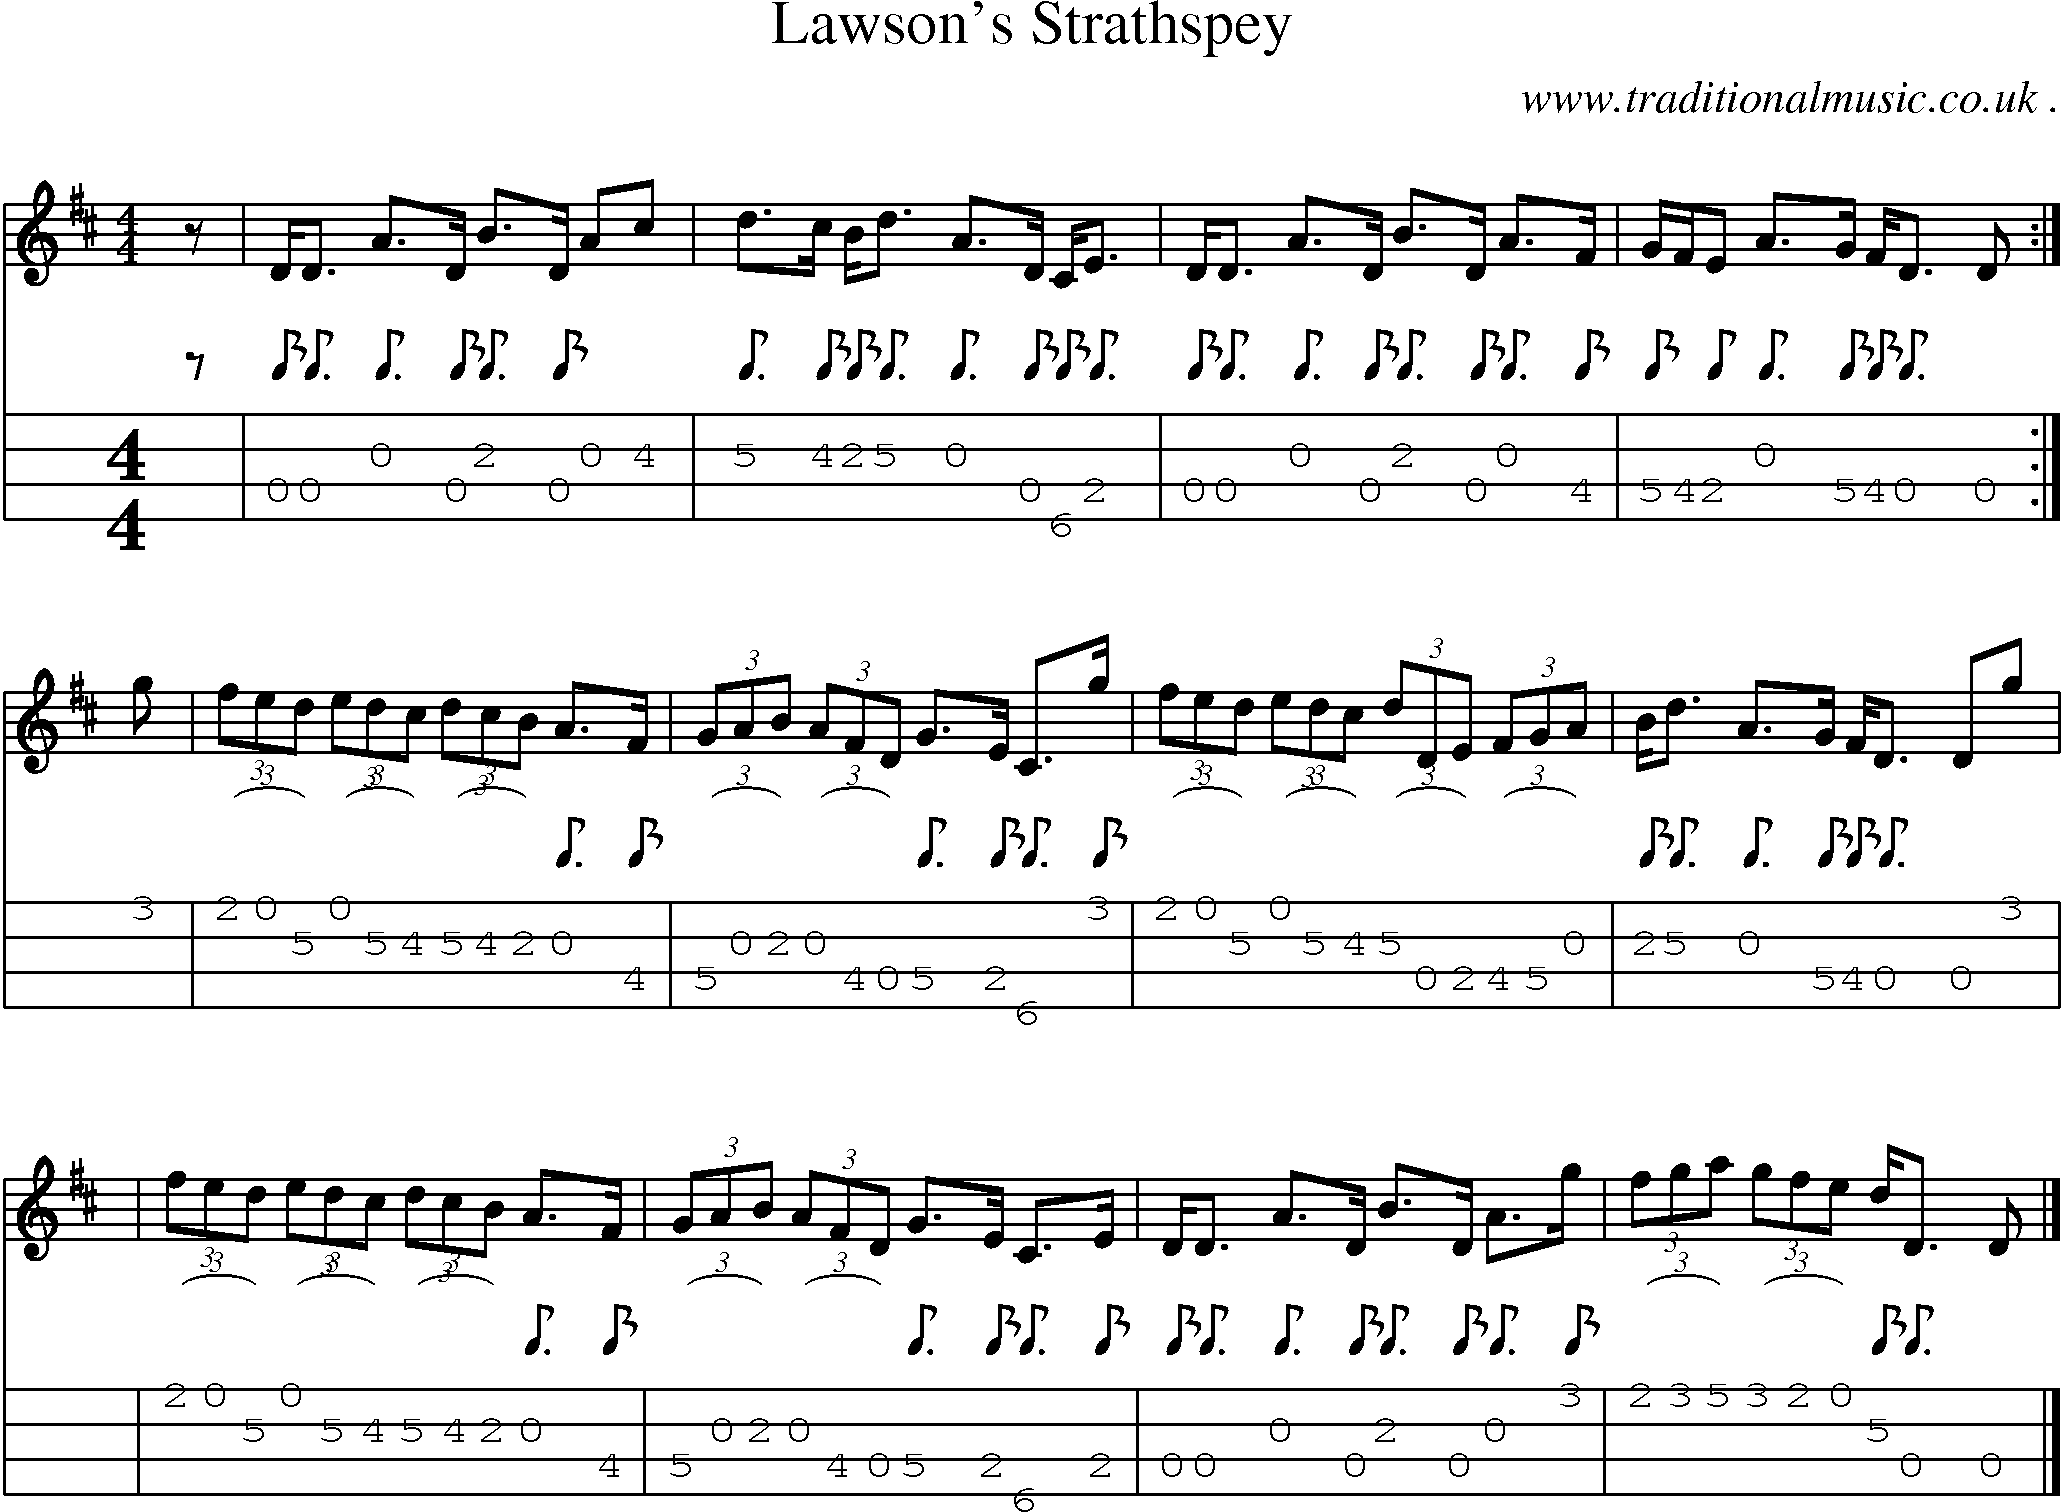 Sheet-music  score, Chords and Mandolin Tabs for Lawsons Strathspey